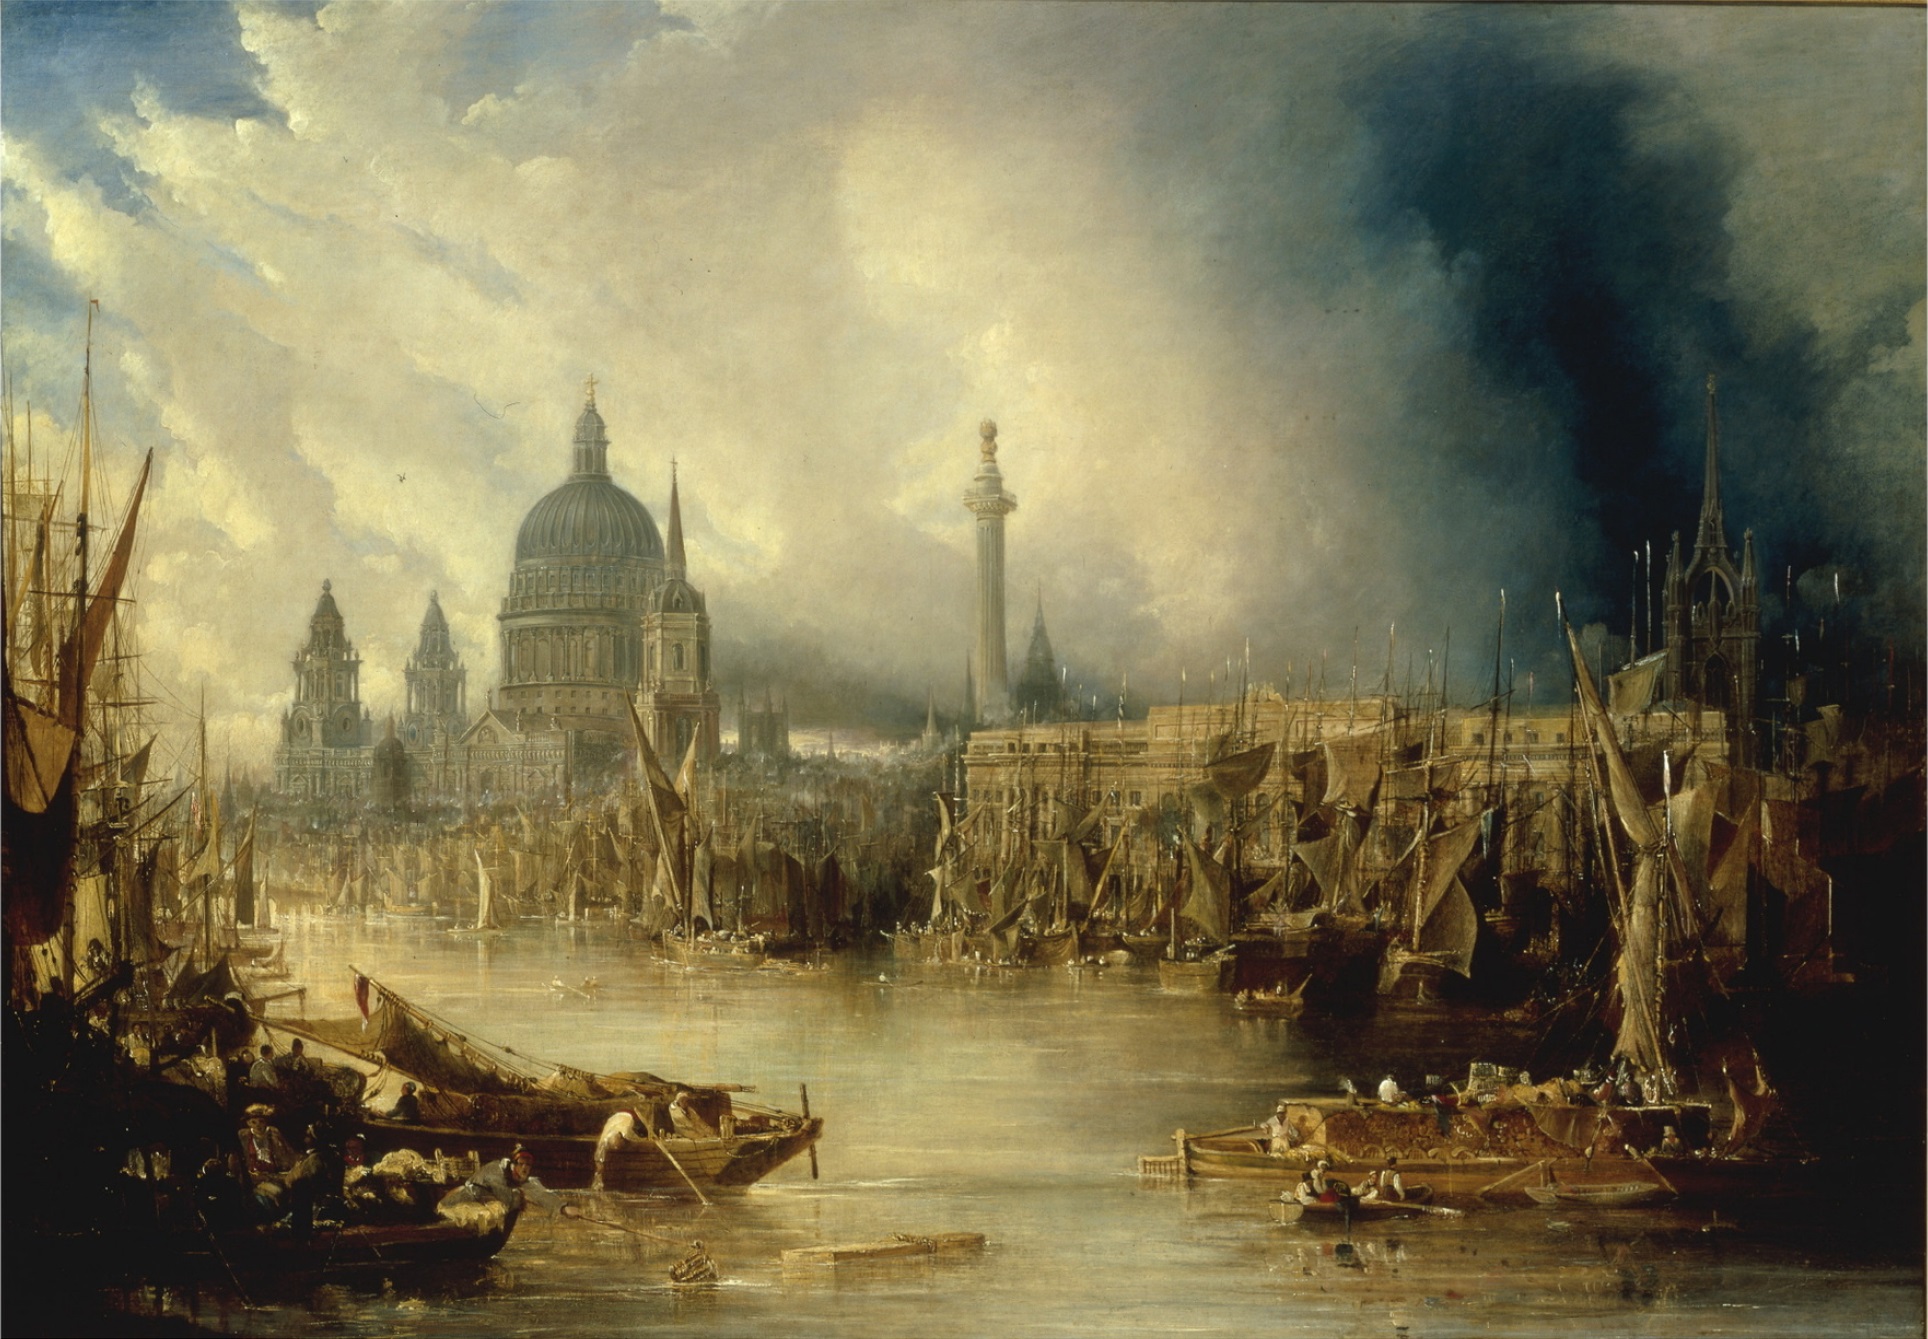 A landscape view of a city with a river full of boats and a cathedral in the background